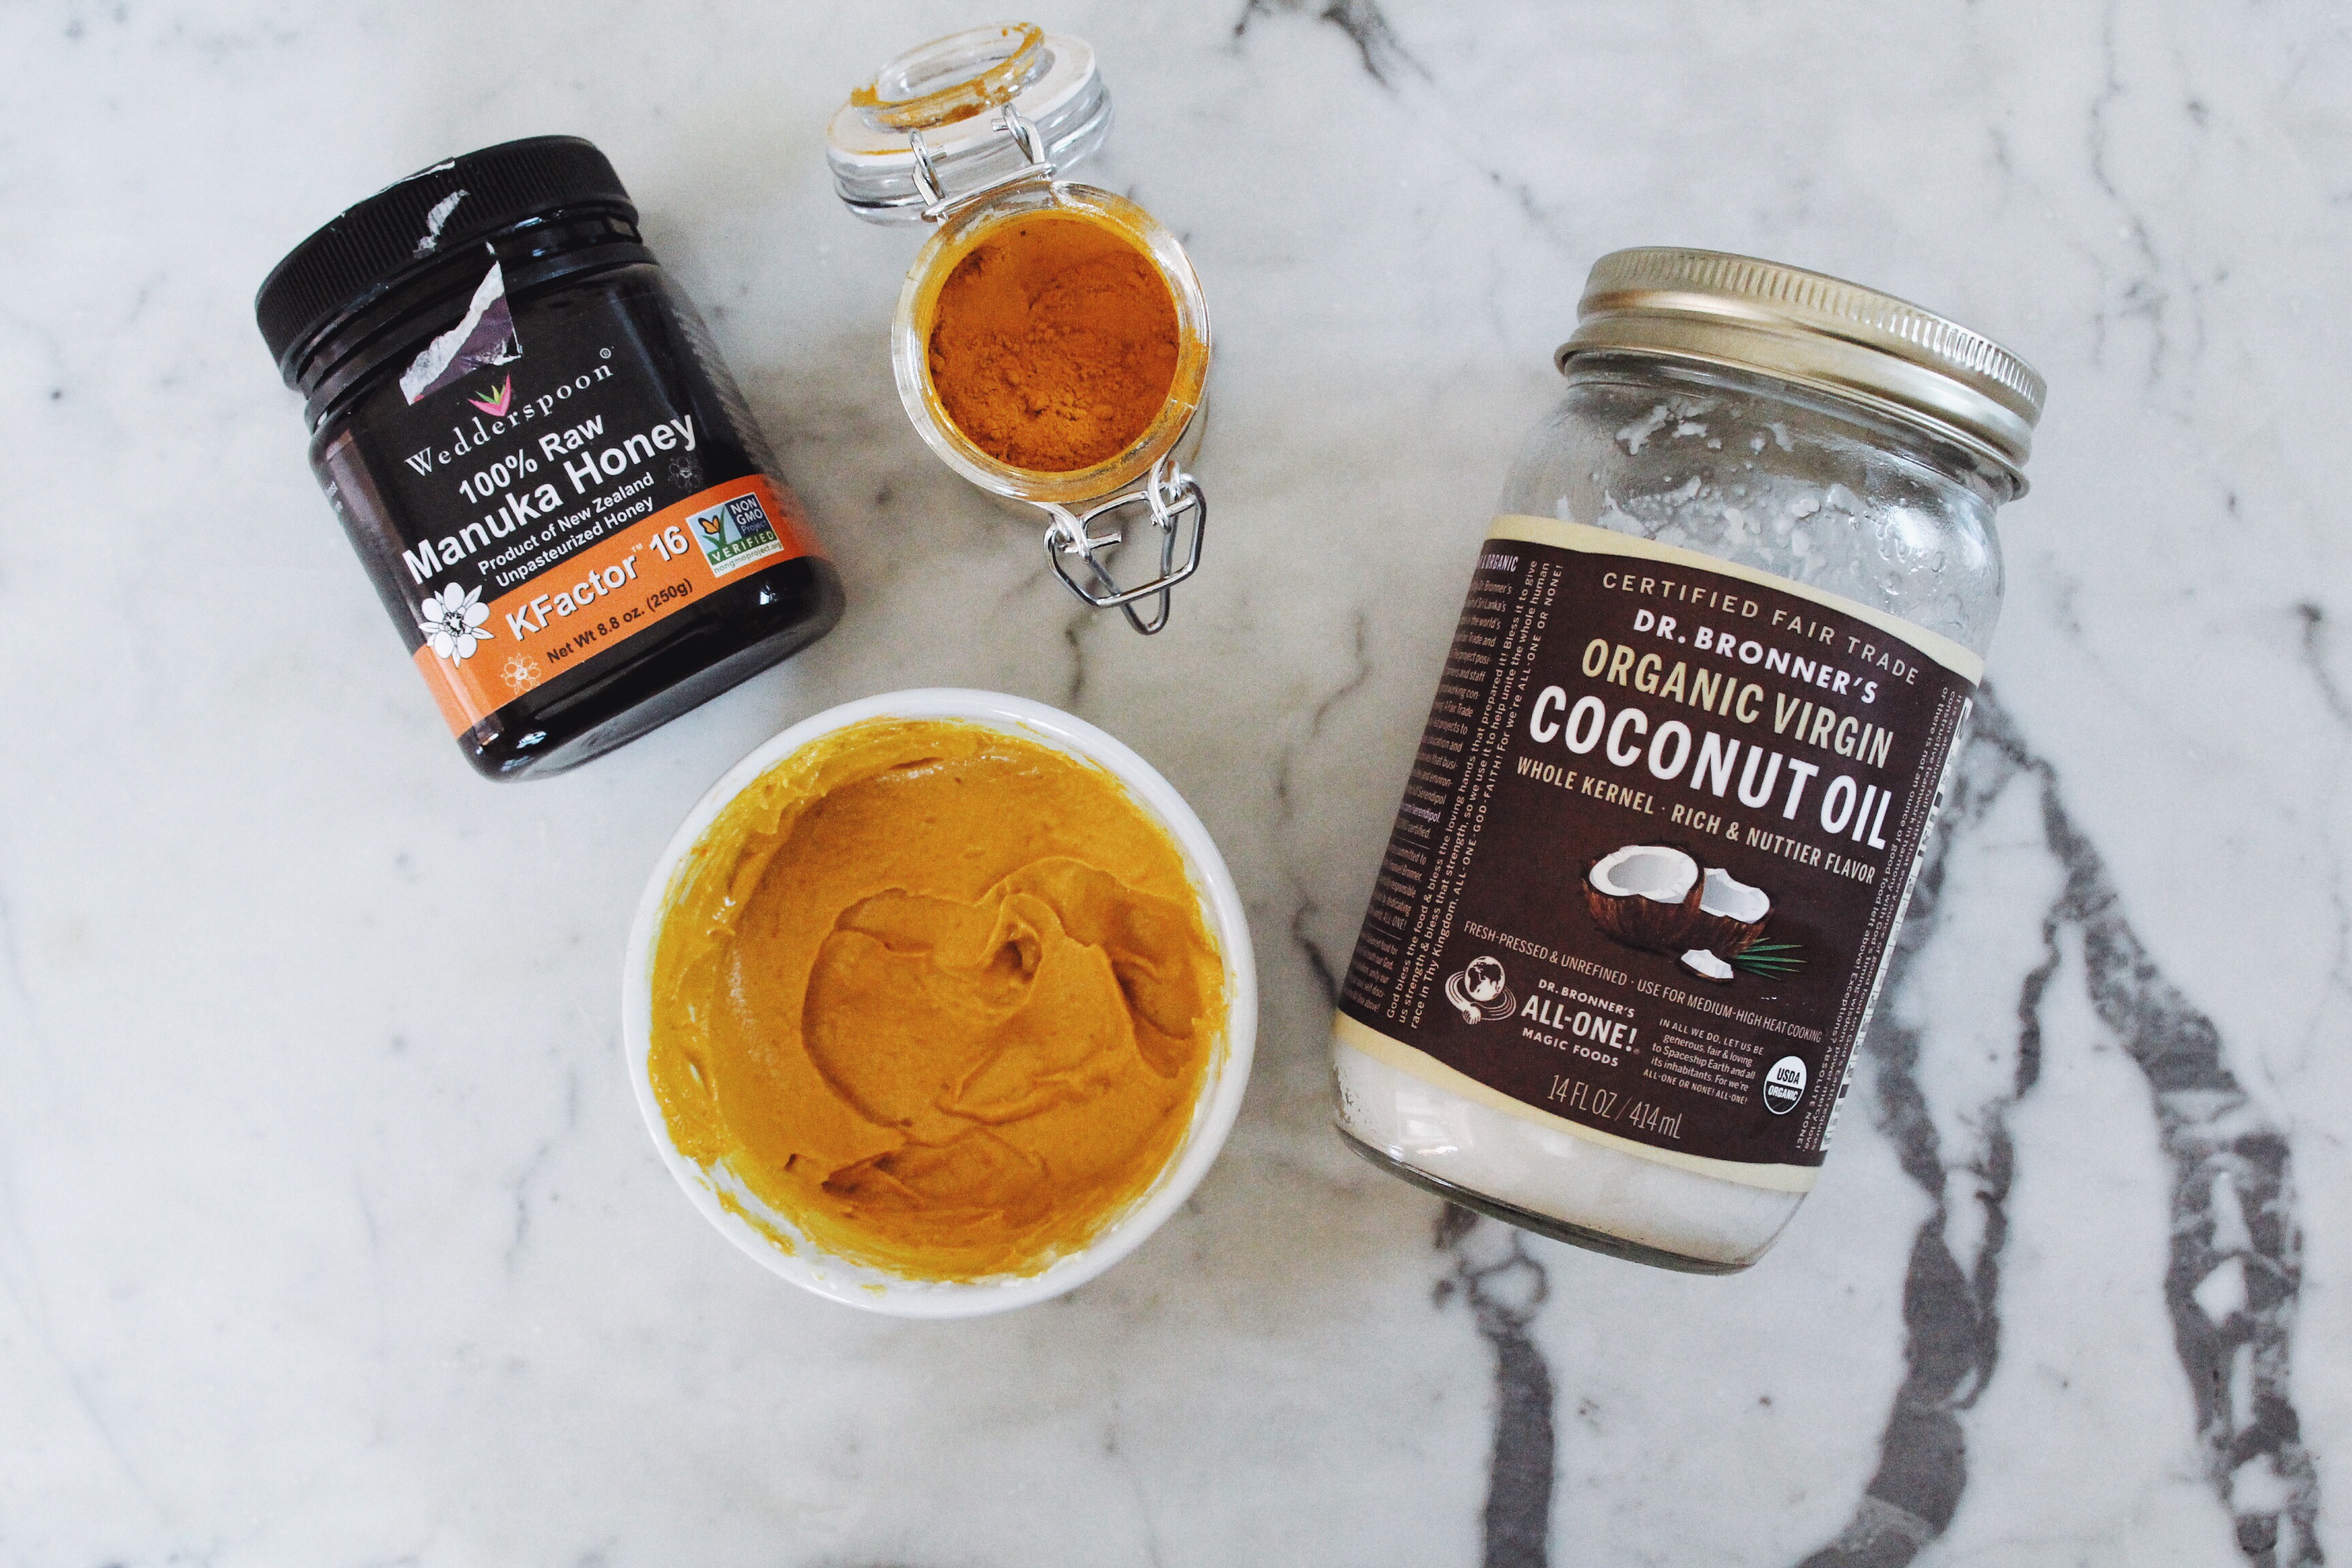 Soothing turmeric face mask recipe || The Conscious Collective 